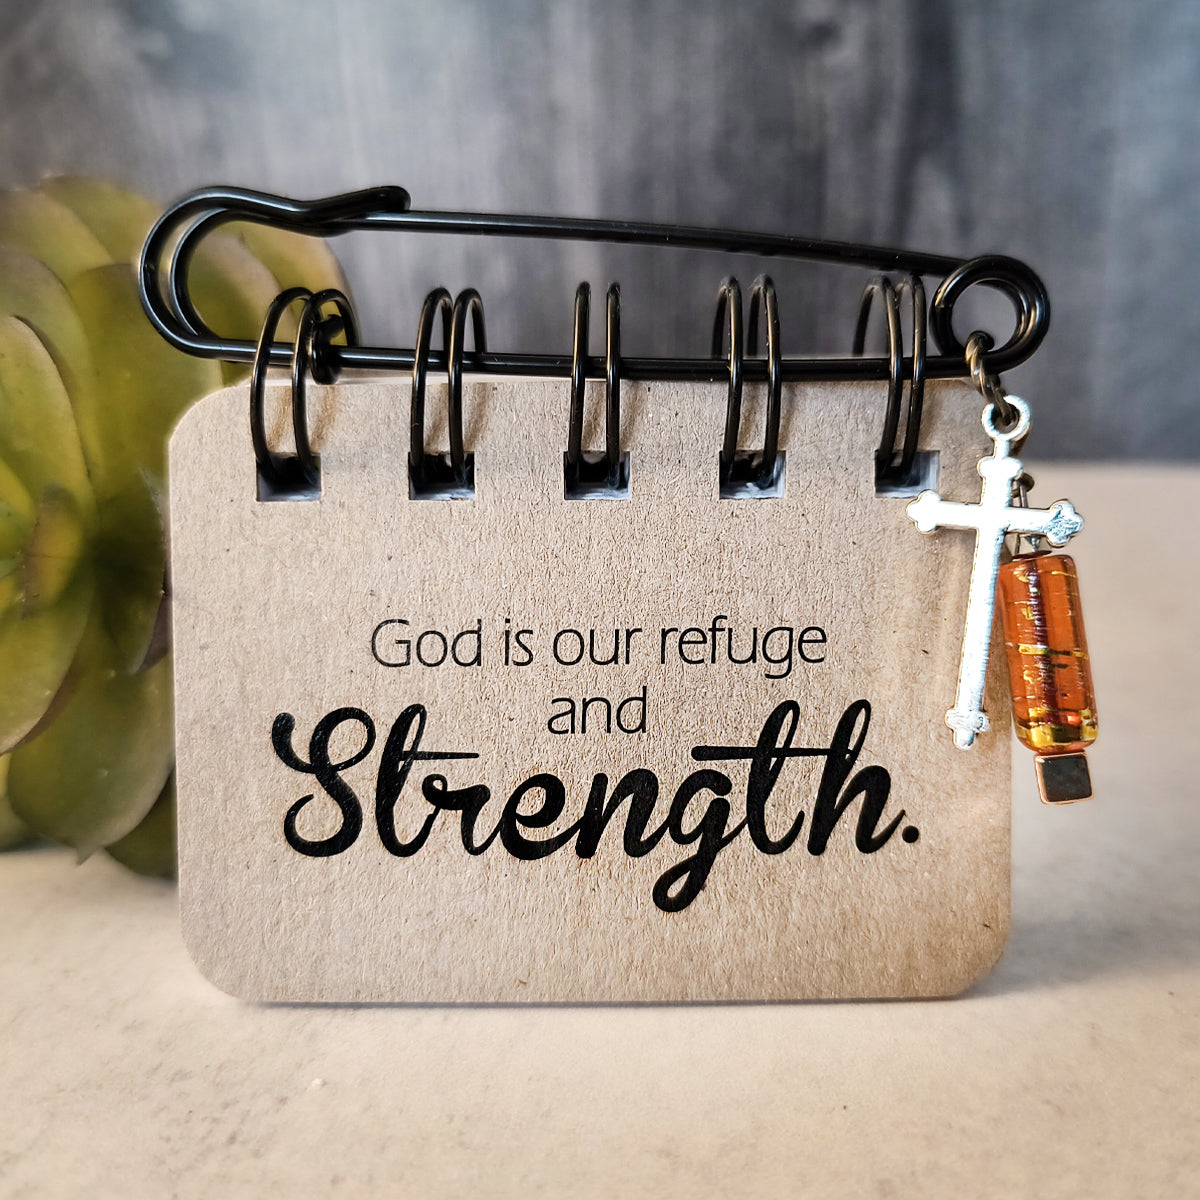 Strength Scripture Flip. 20 pages of verses that remind us that our strength is found in the Lord.